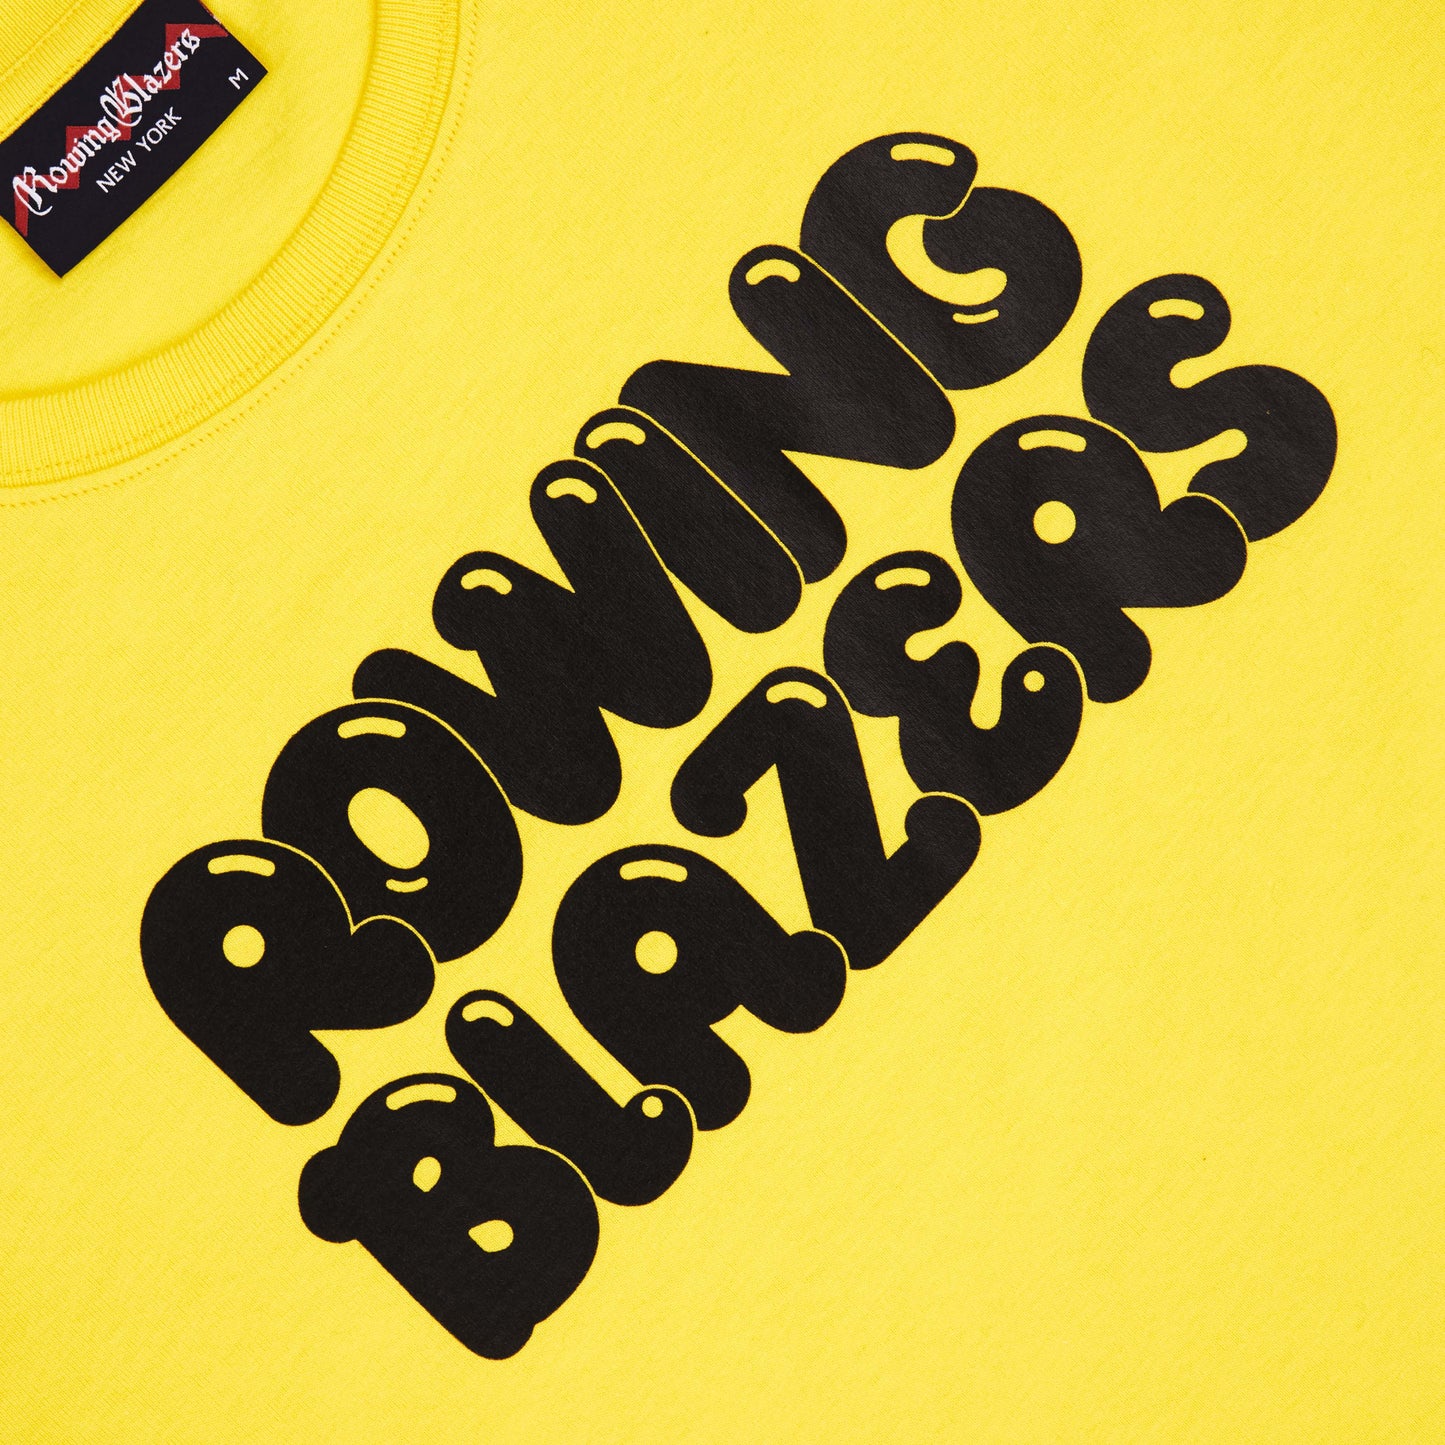 "Ginza" Bubble Letters Yellow Tee